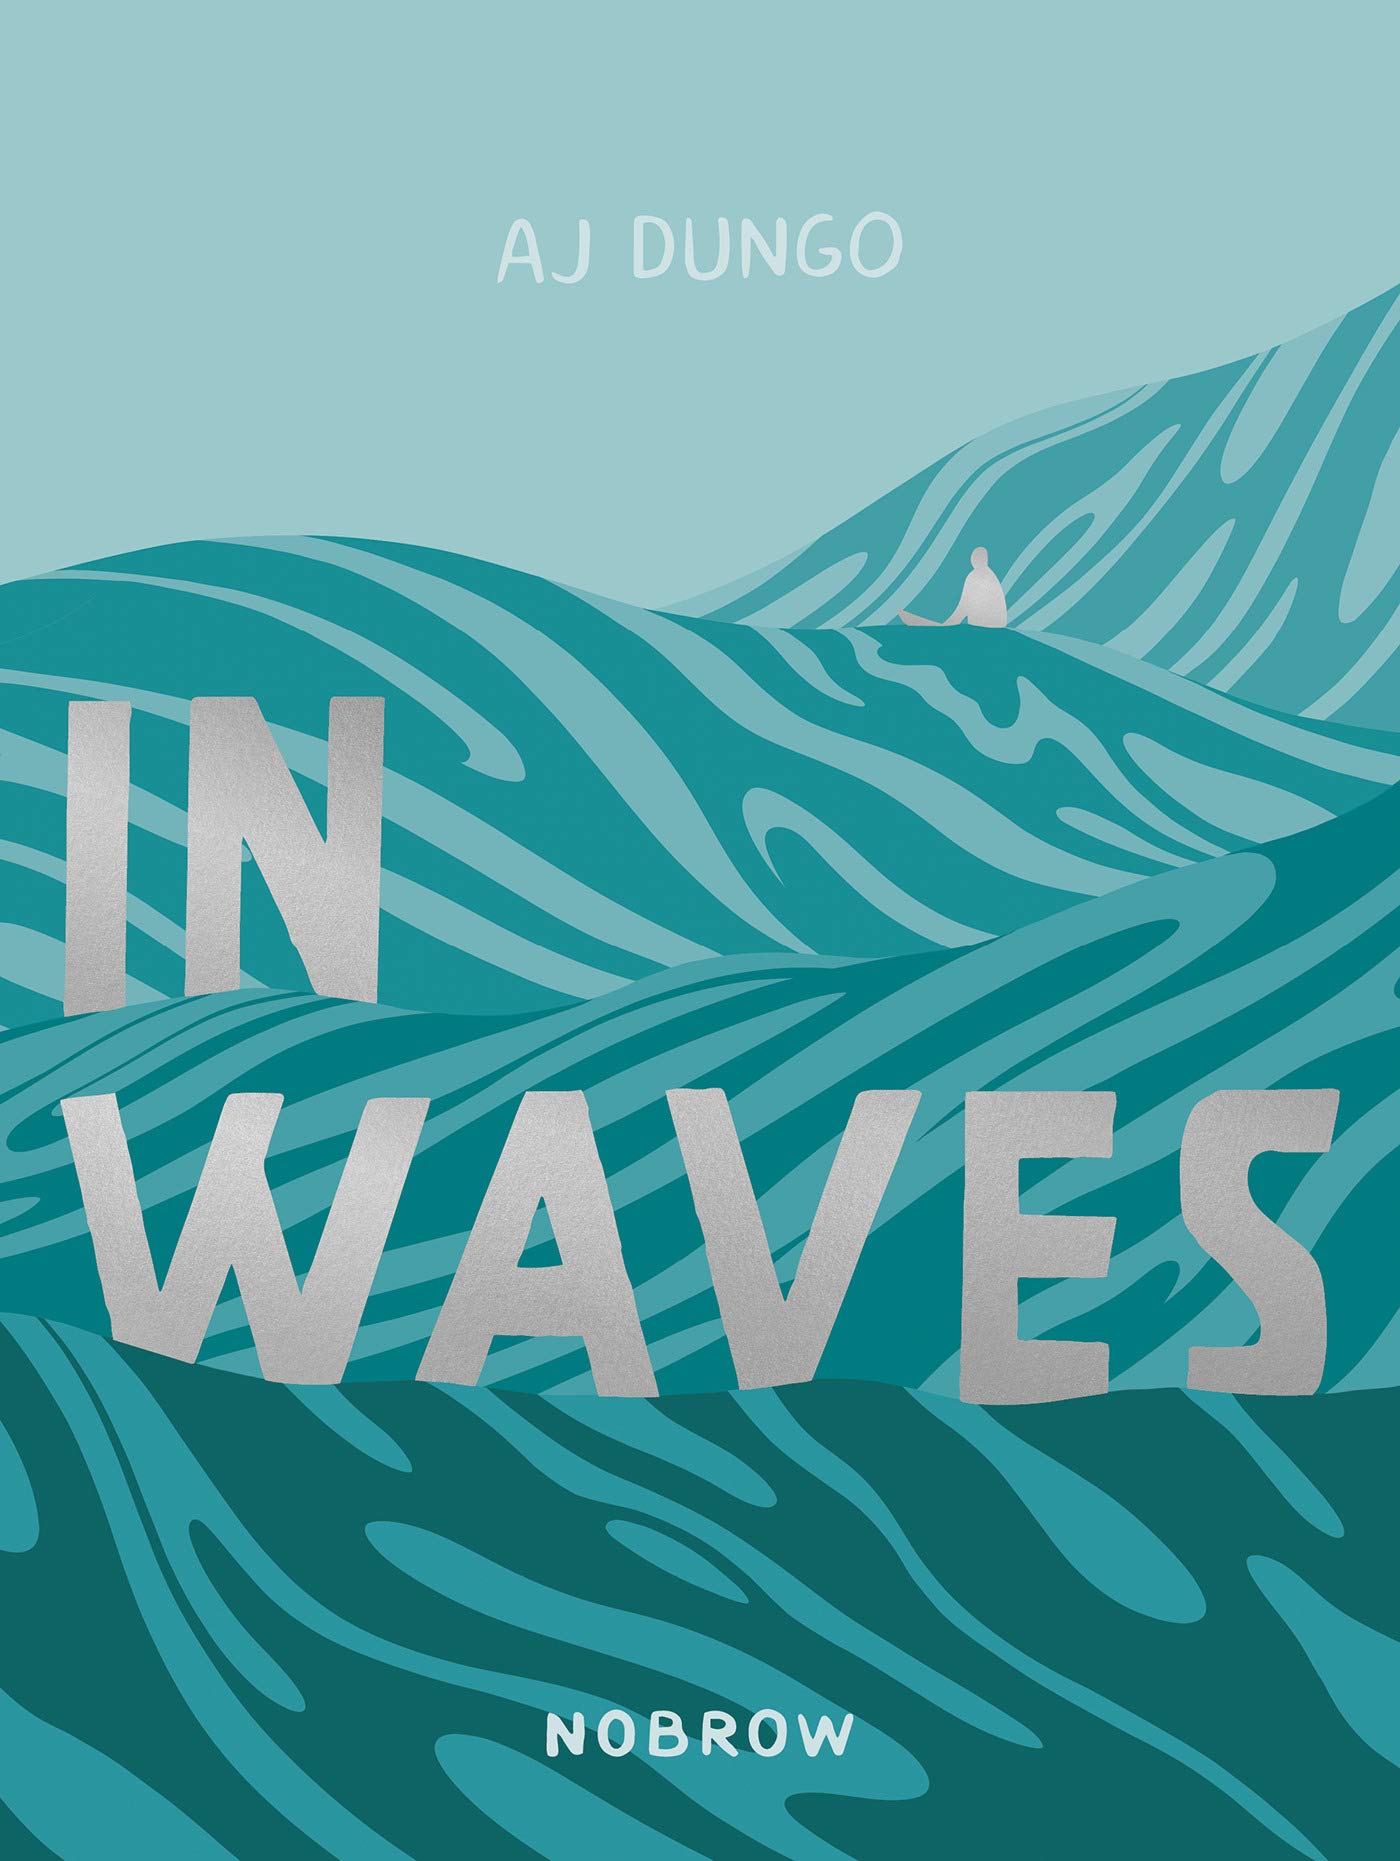 'In Waves' by AJ Dungo